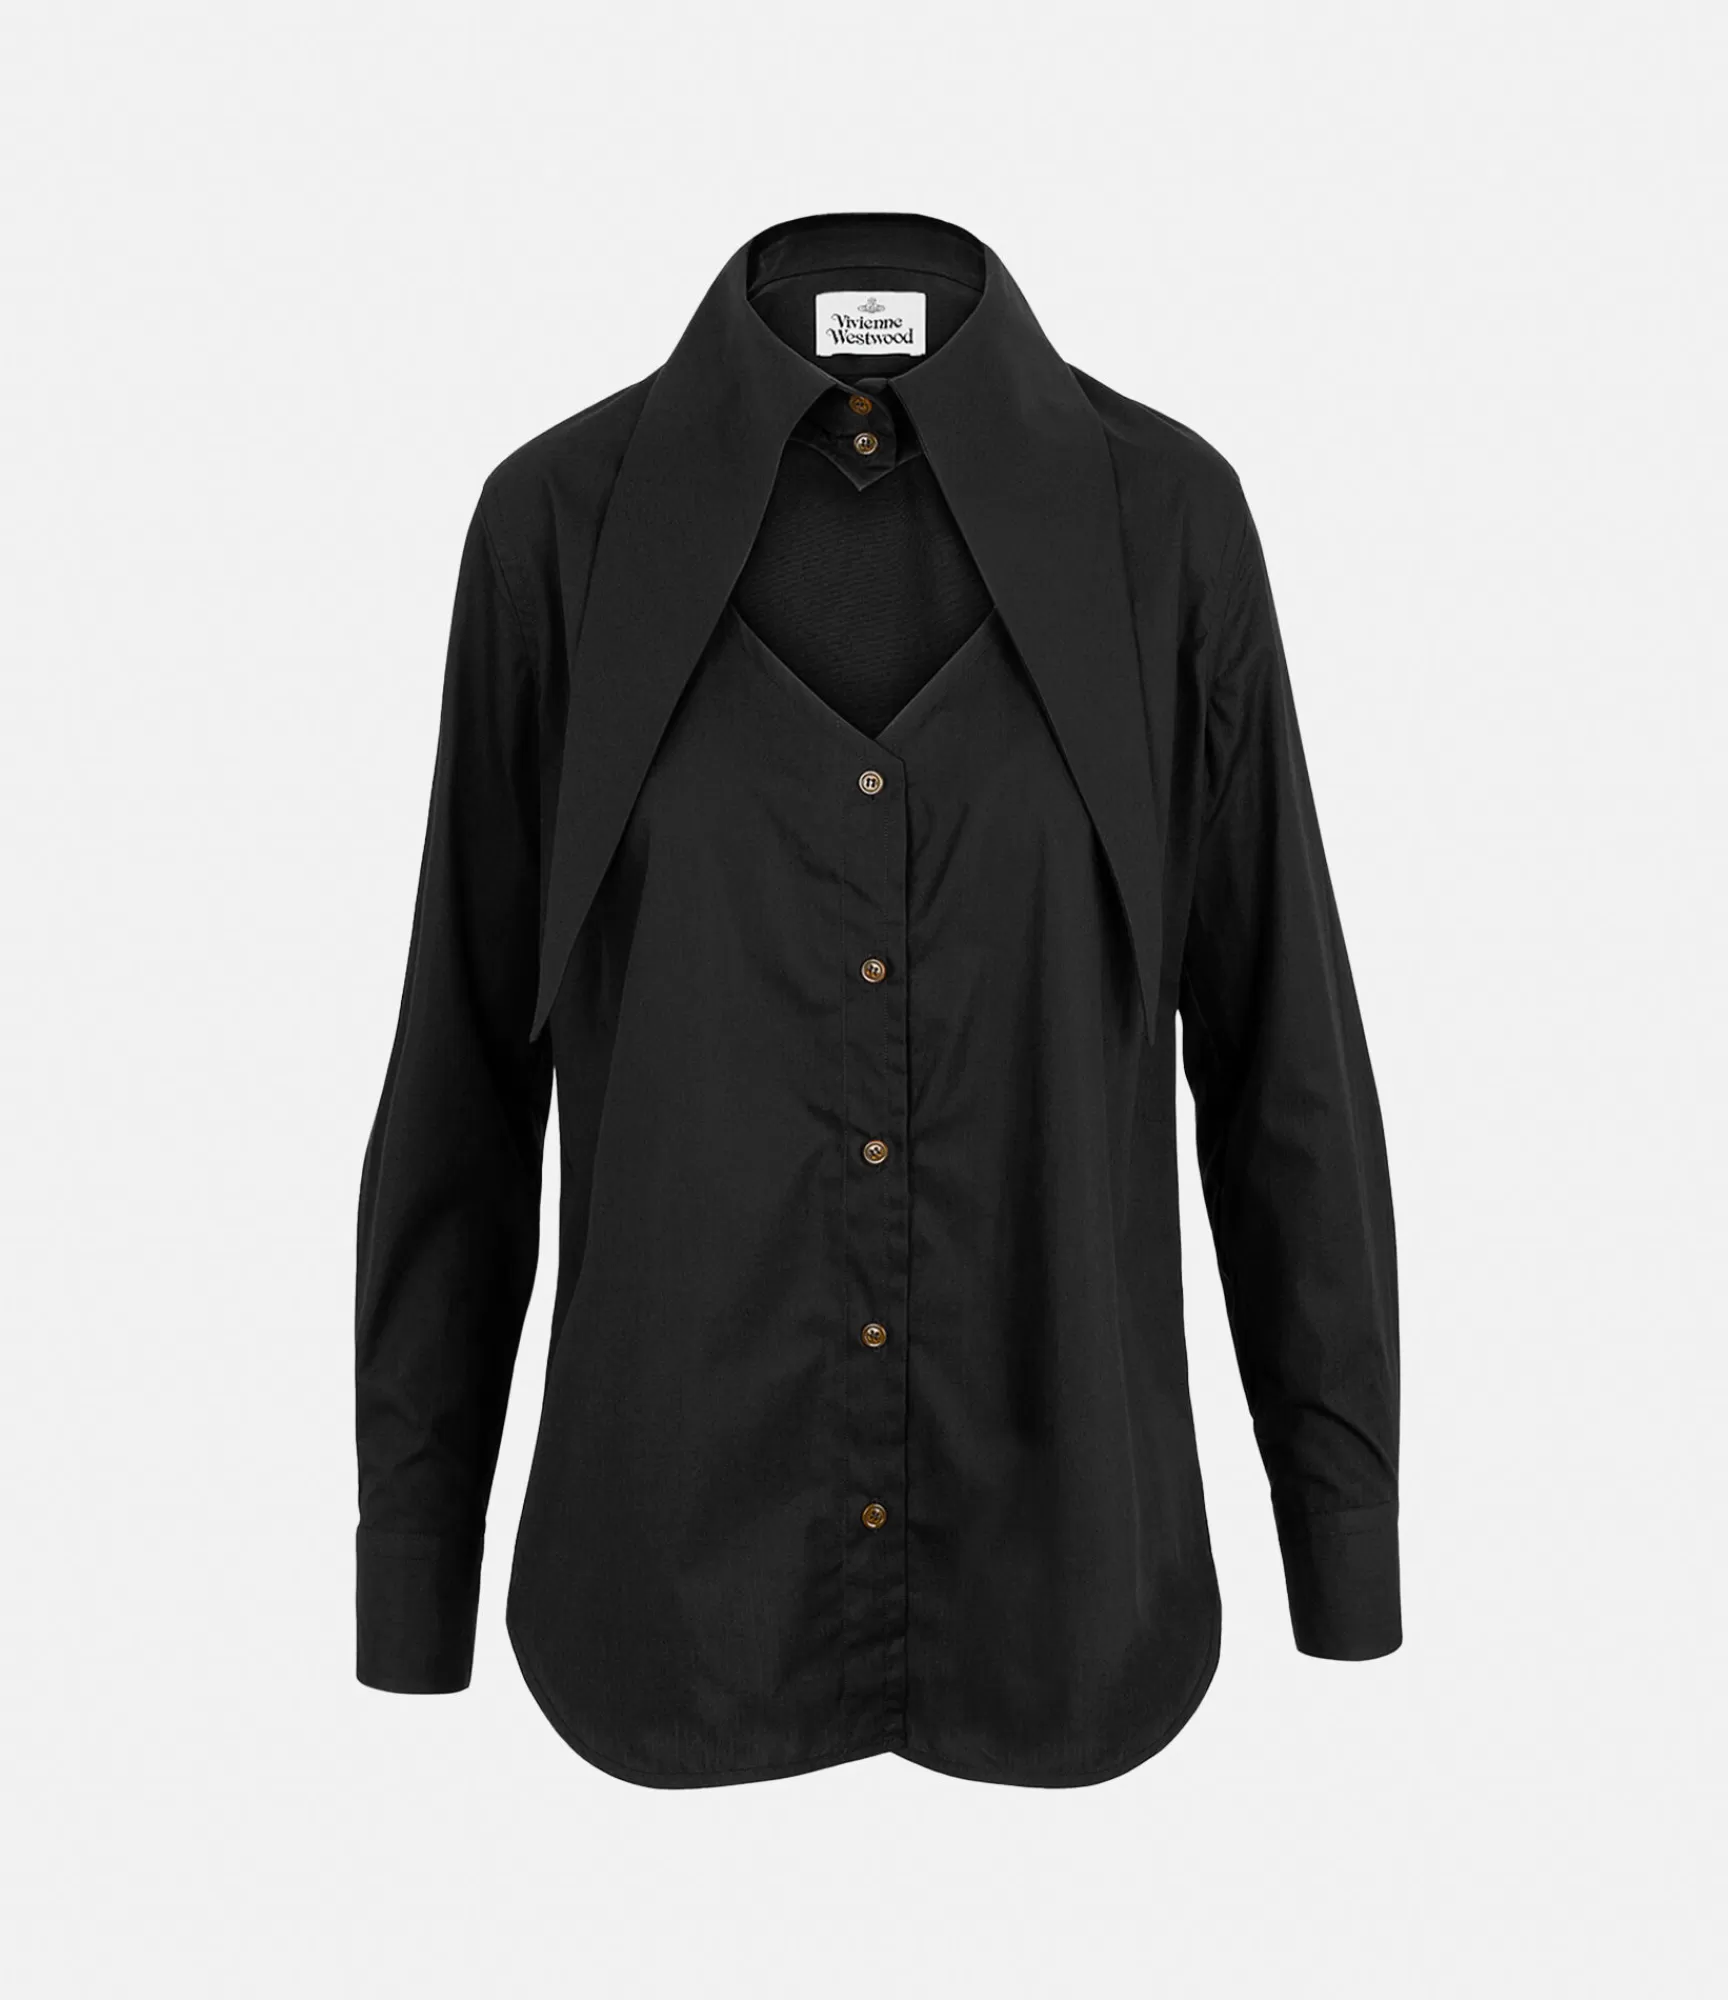 Vivienne Westwood Tops and Shirts*Heart shirt Black